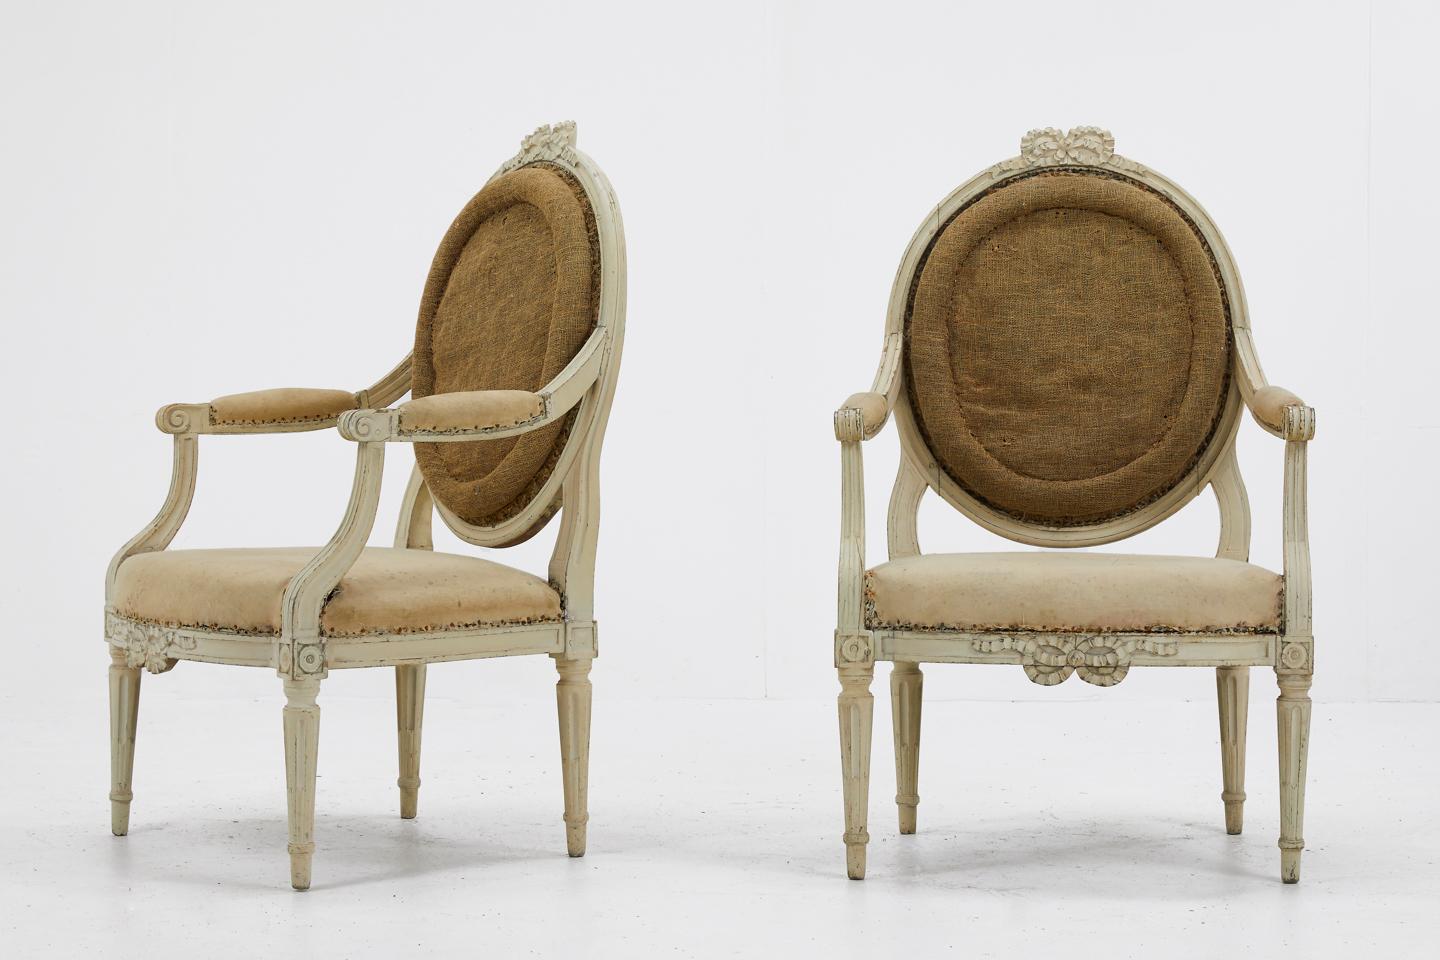 Pair of good sized French painted carved wood 18th century armchairs. Stripped back to calico and hessian, ready to re-cover.

All restoration to the frame and structure is complete.

Measures: Seat height 43 cm
Seat depth 51 cm.